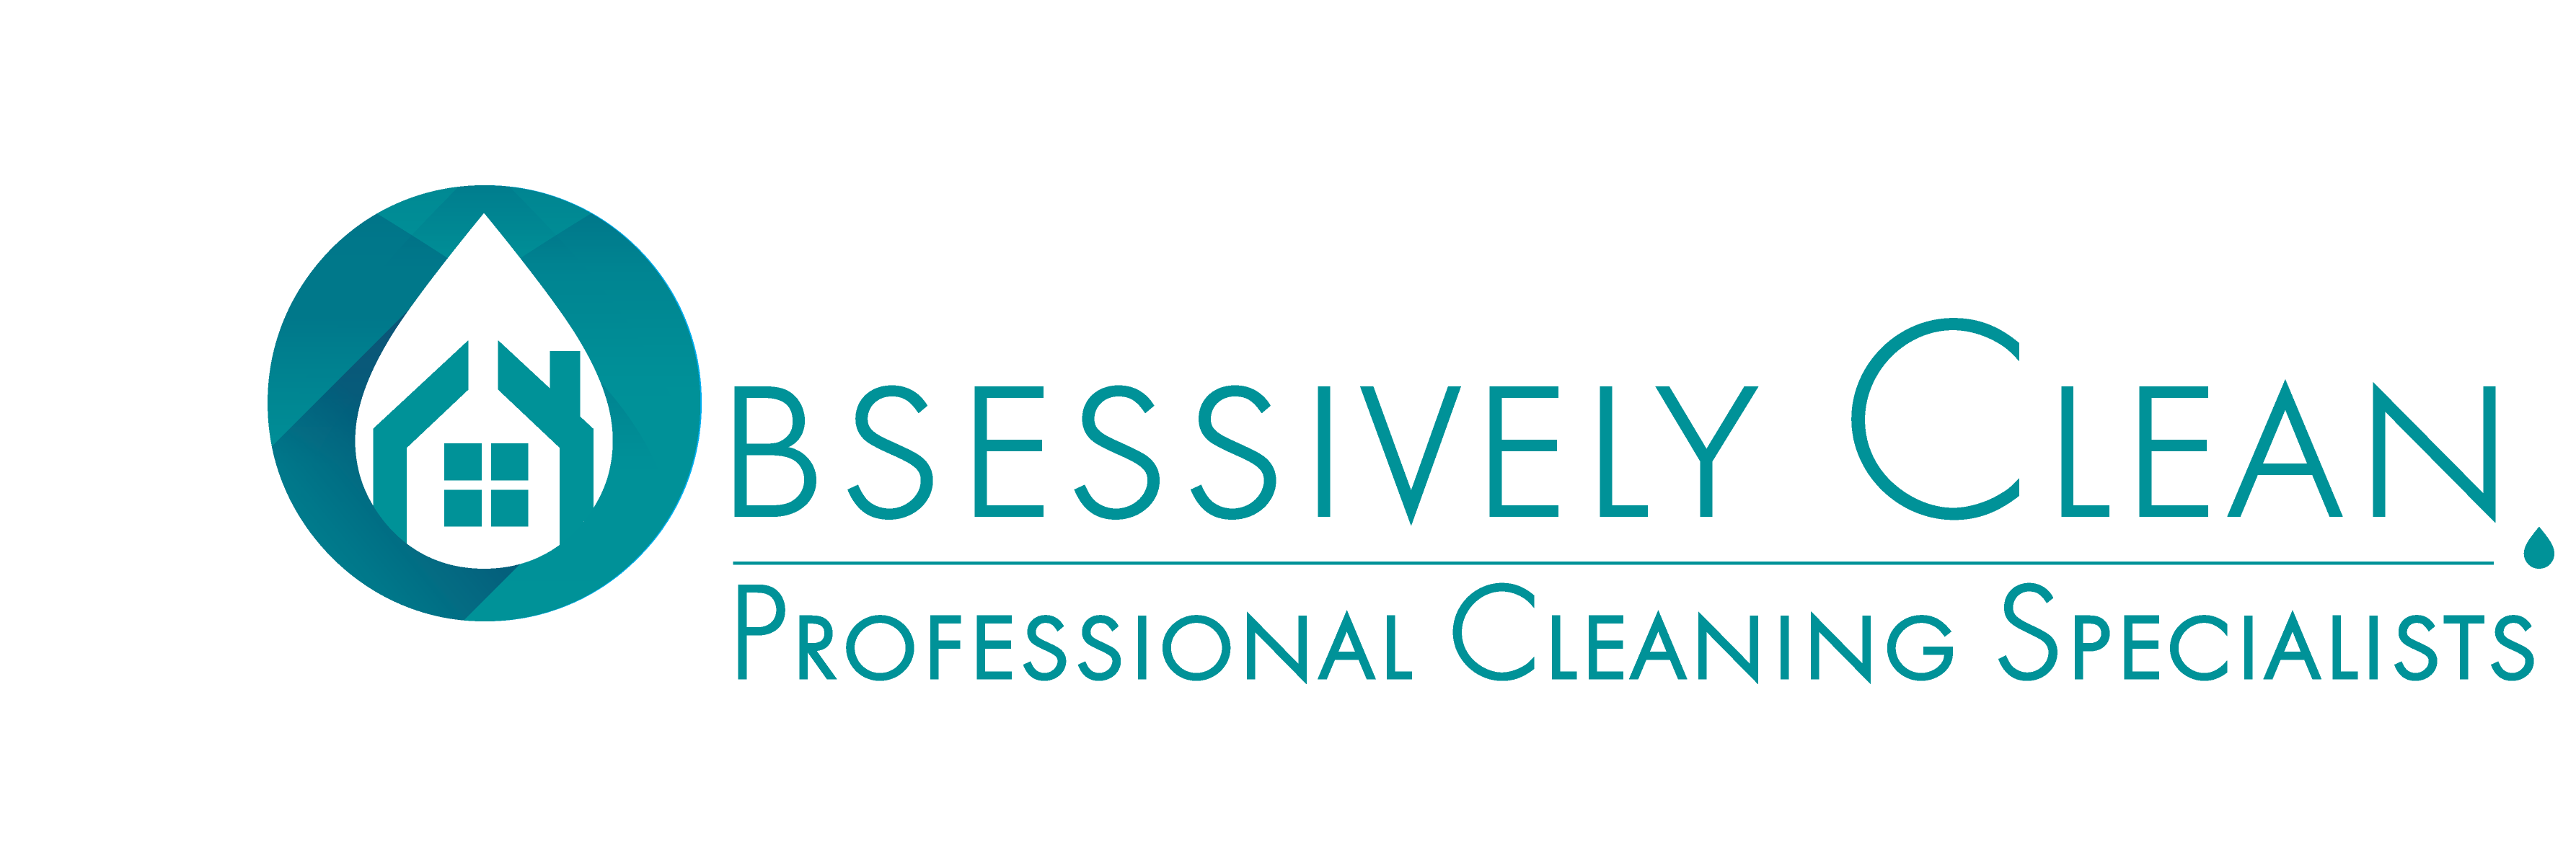 logo for Obsessively Clean Limited